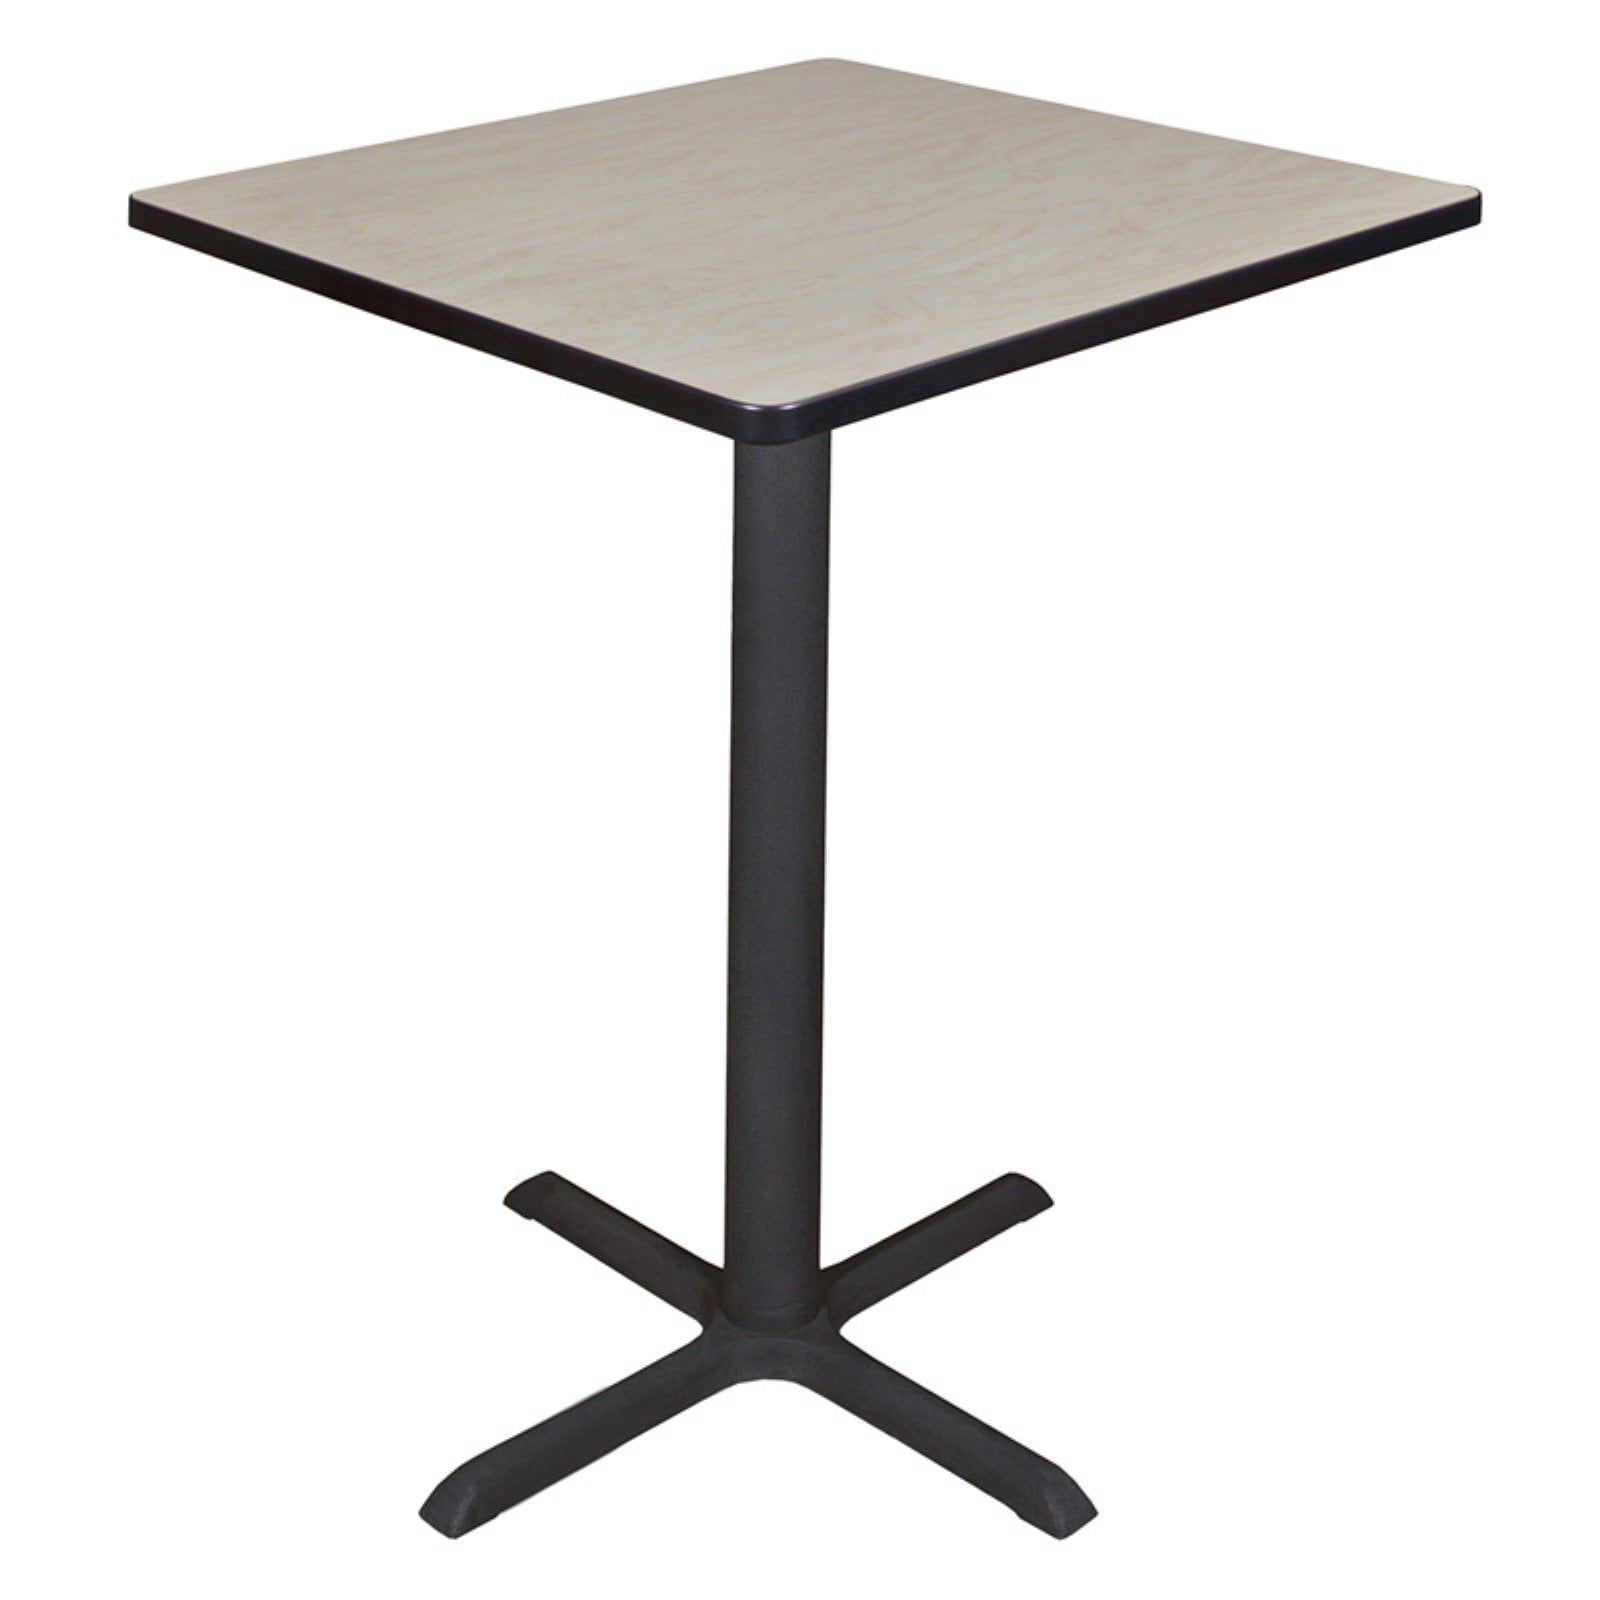 Regency Cain Steel Coffee Tables In 2019 Regency Cain Square Cafe Table – Walmart (View 2 of 15)